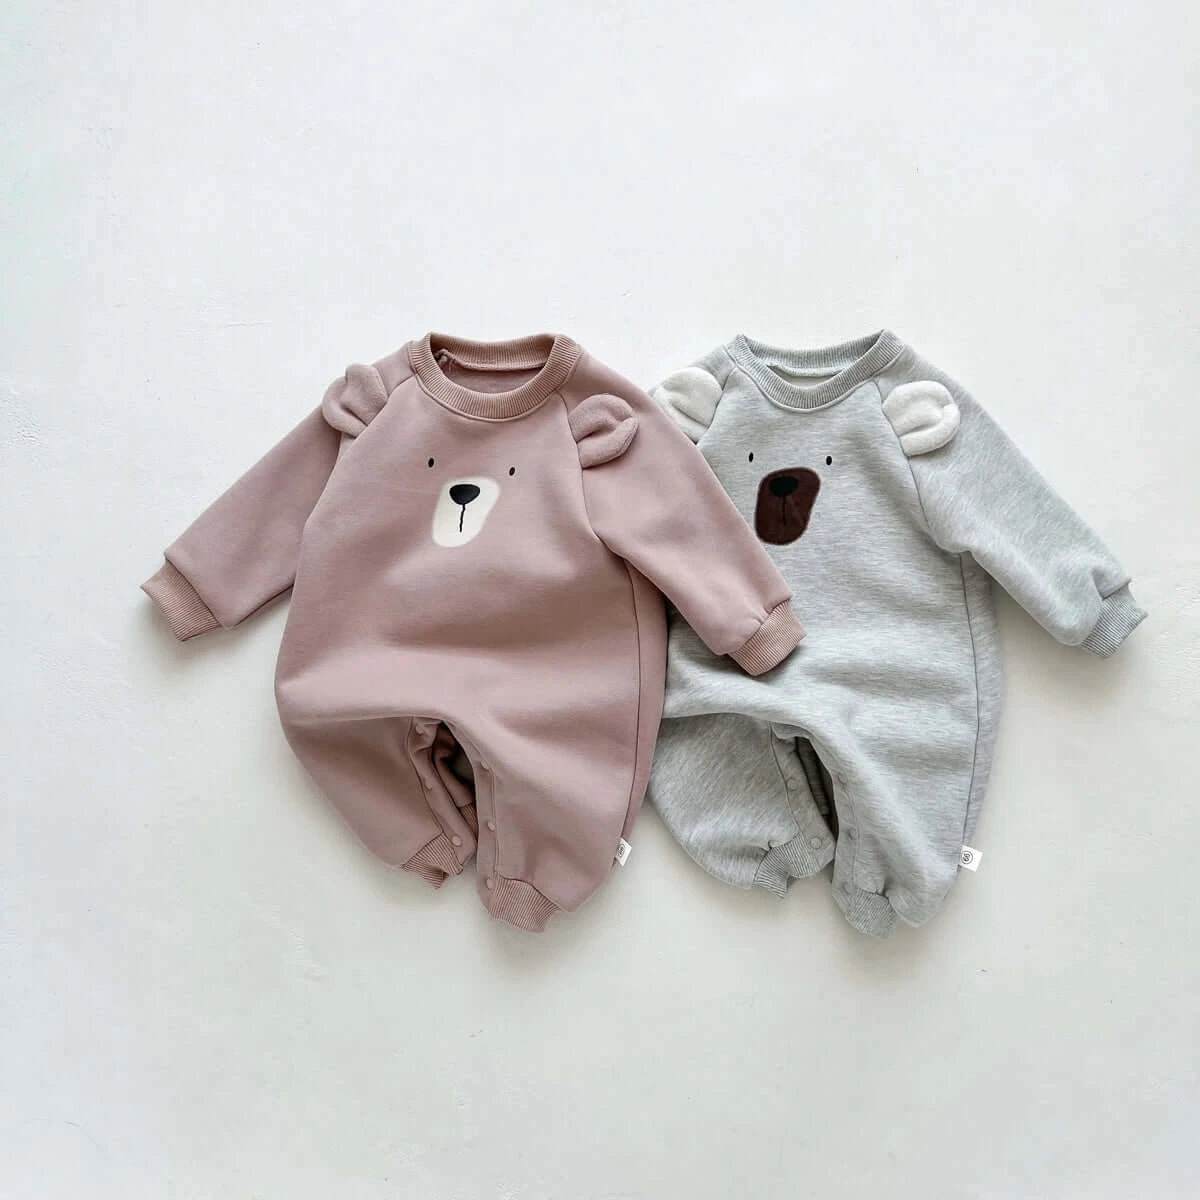 Image of cosy fleece baby onesie with bear ears, perfect for winter comfort. Shop now at OleOle.